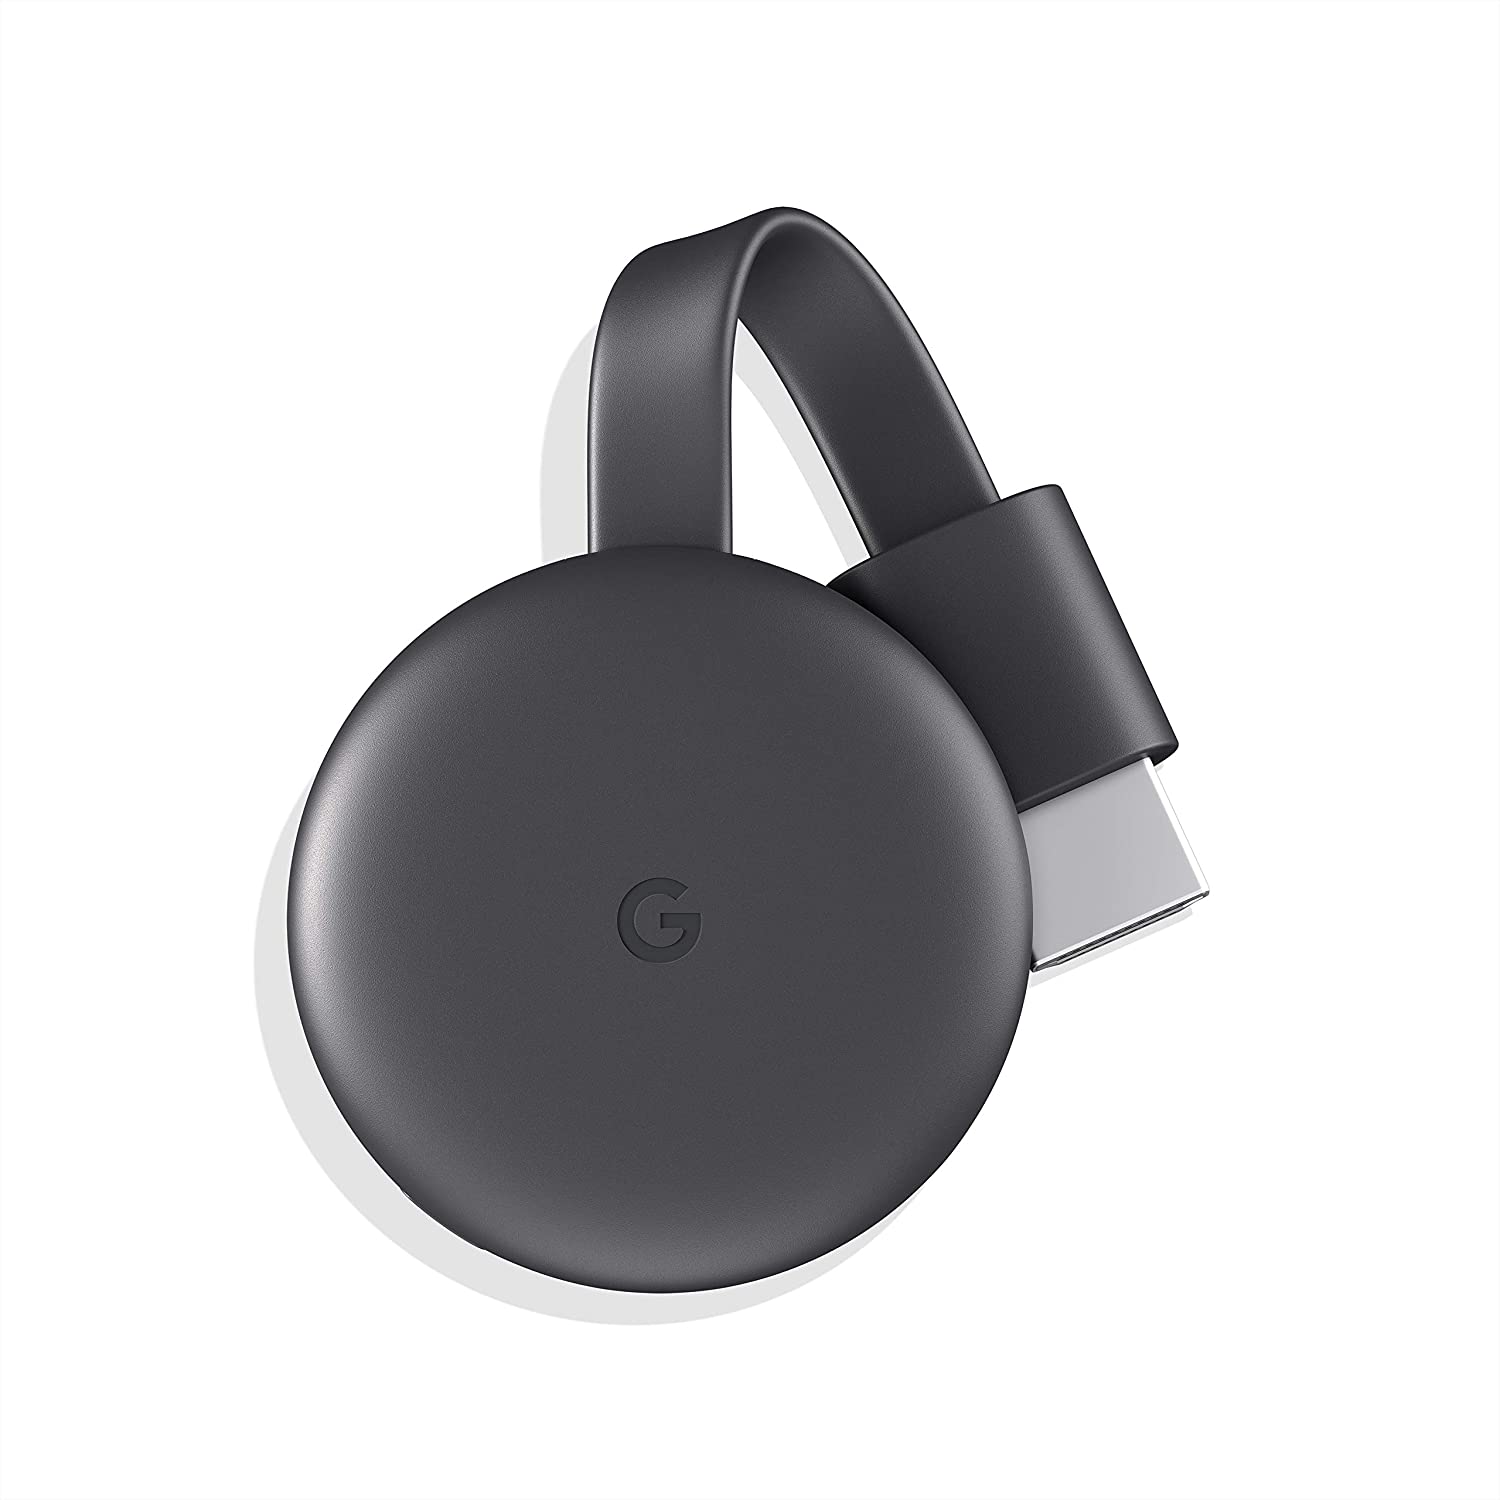 Chromecast coupon codes, promo codes and deals